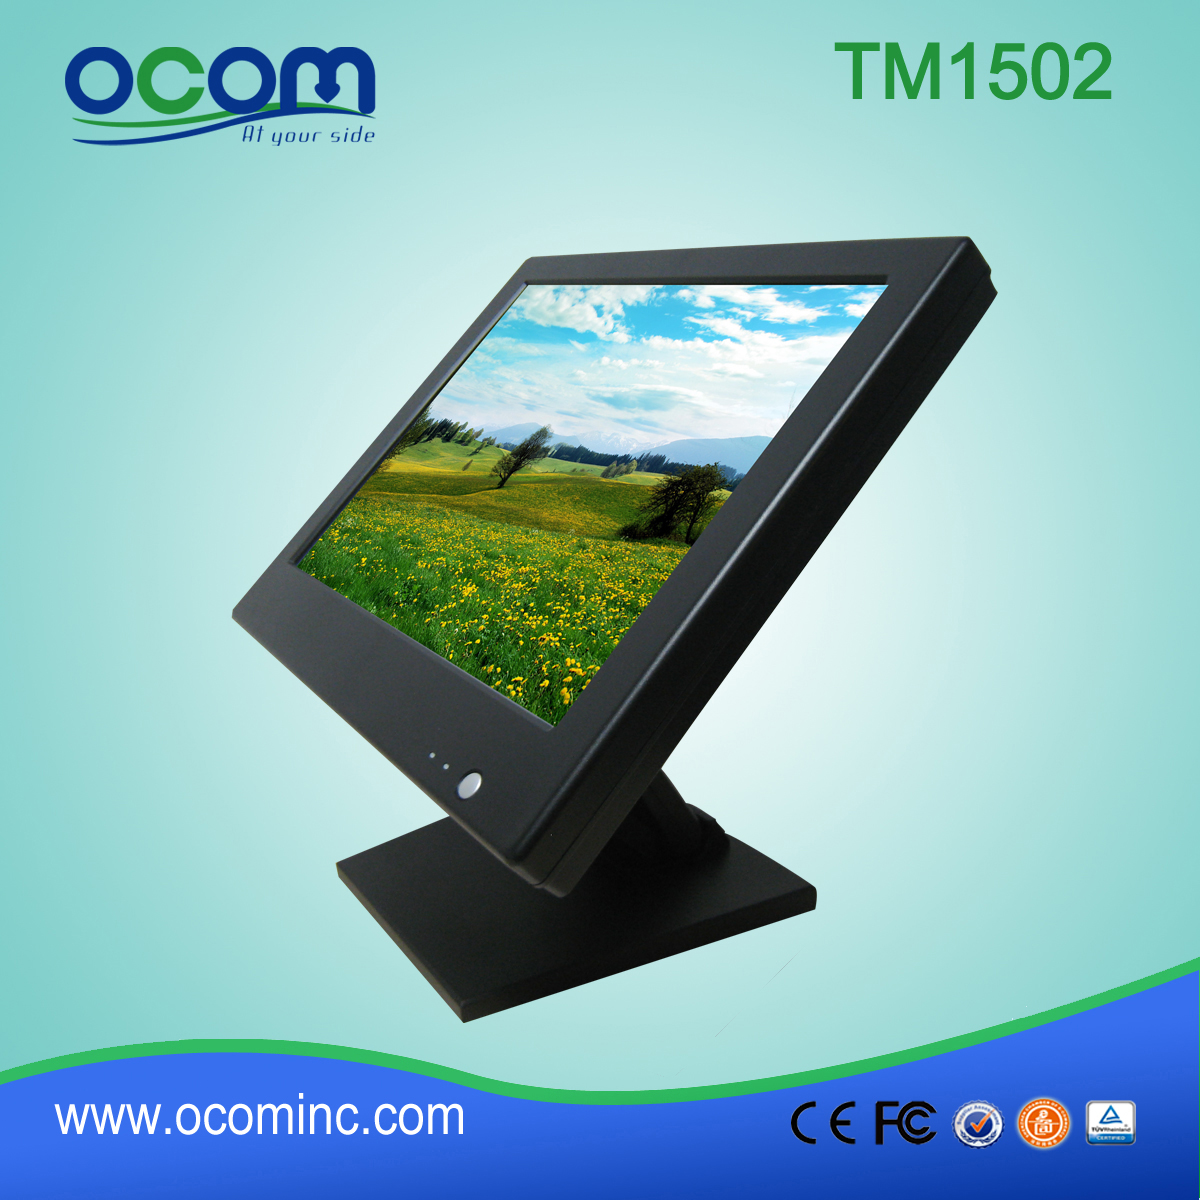 TM1502 Water-proof 15''  LCD Touch Screen VESA POS Monitor